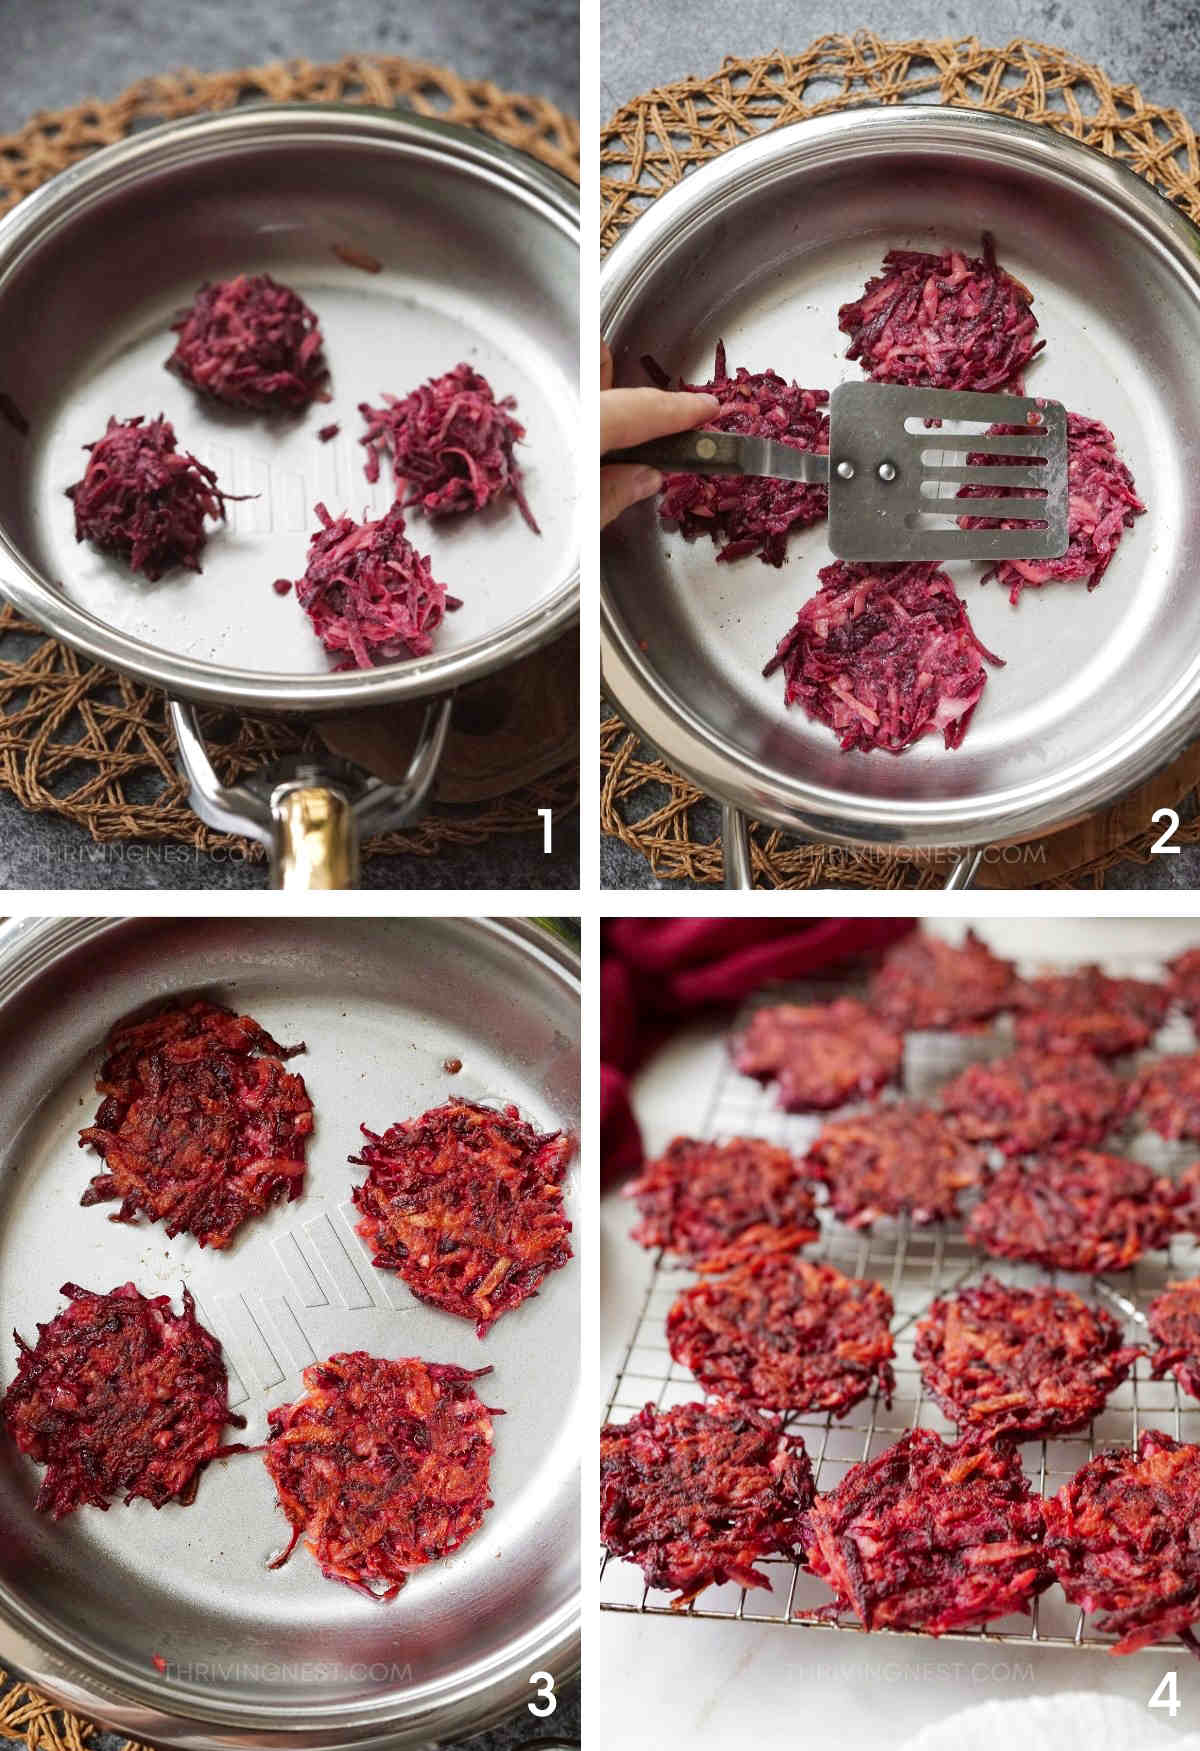 Process shots showing how to fry beetroot patties and cool after cooking on rack.